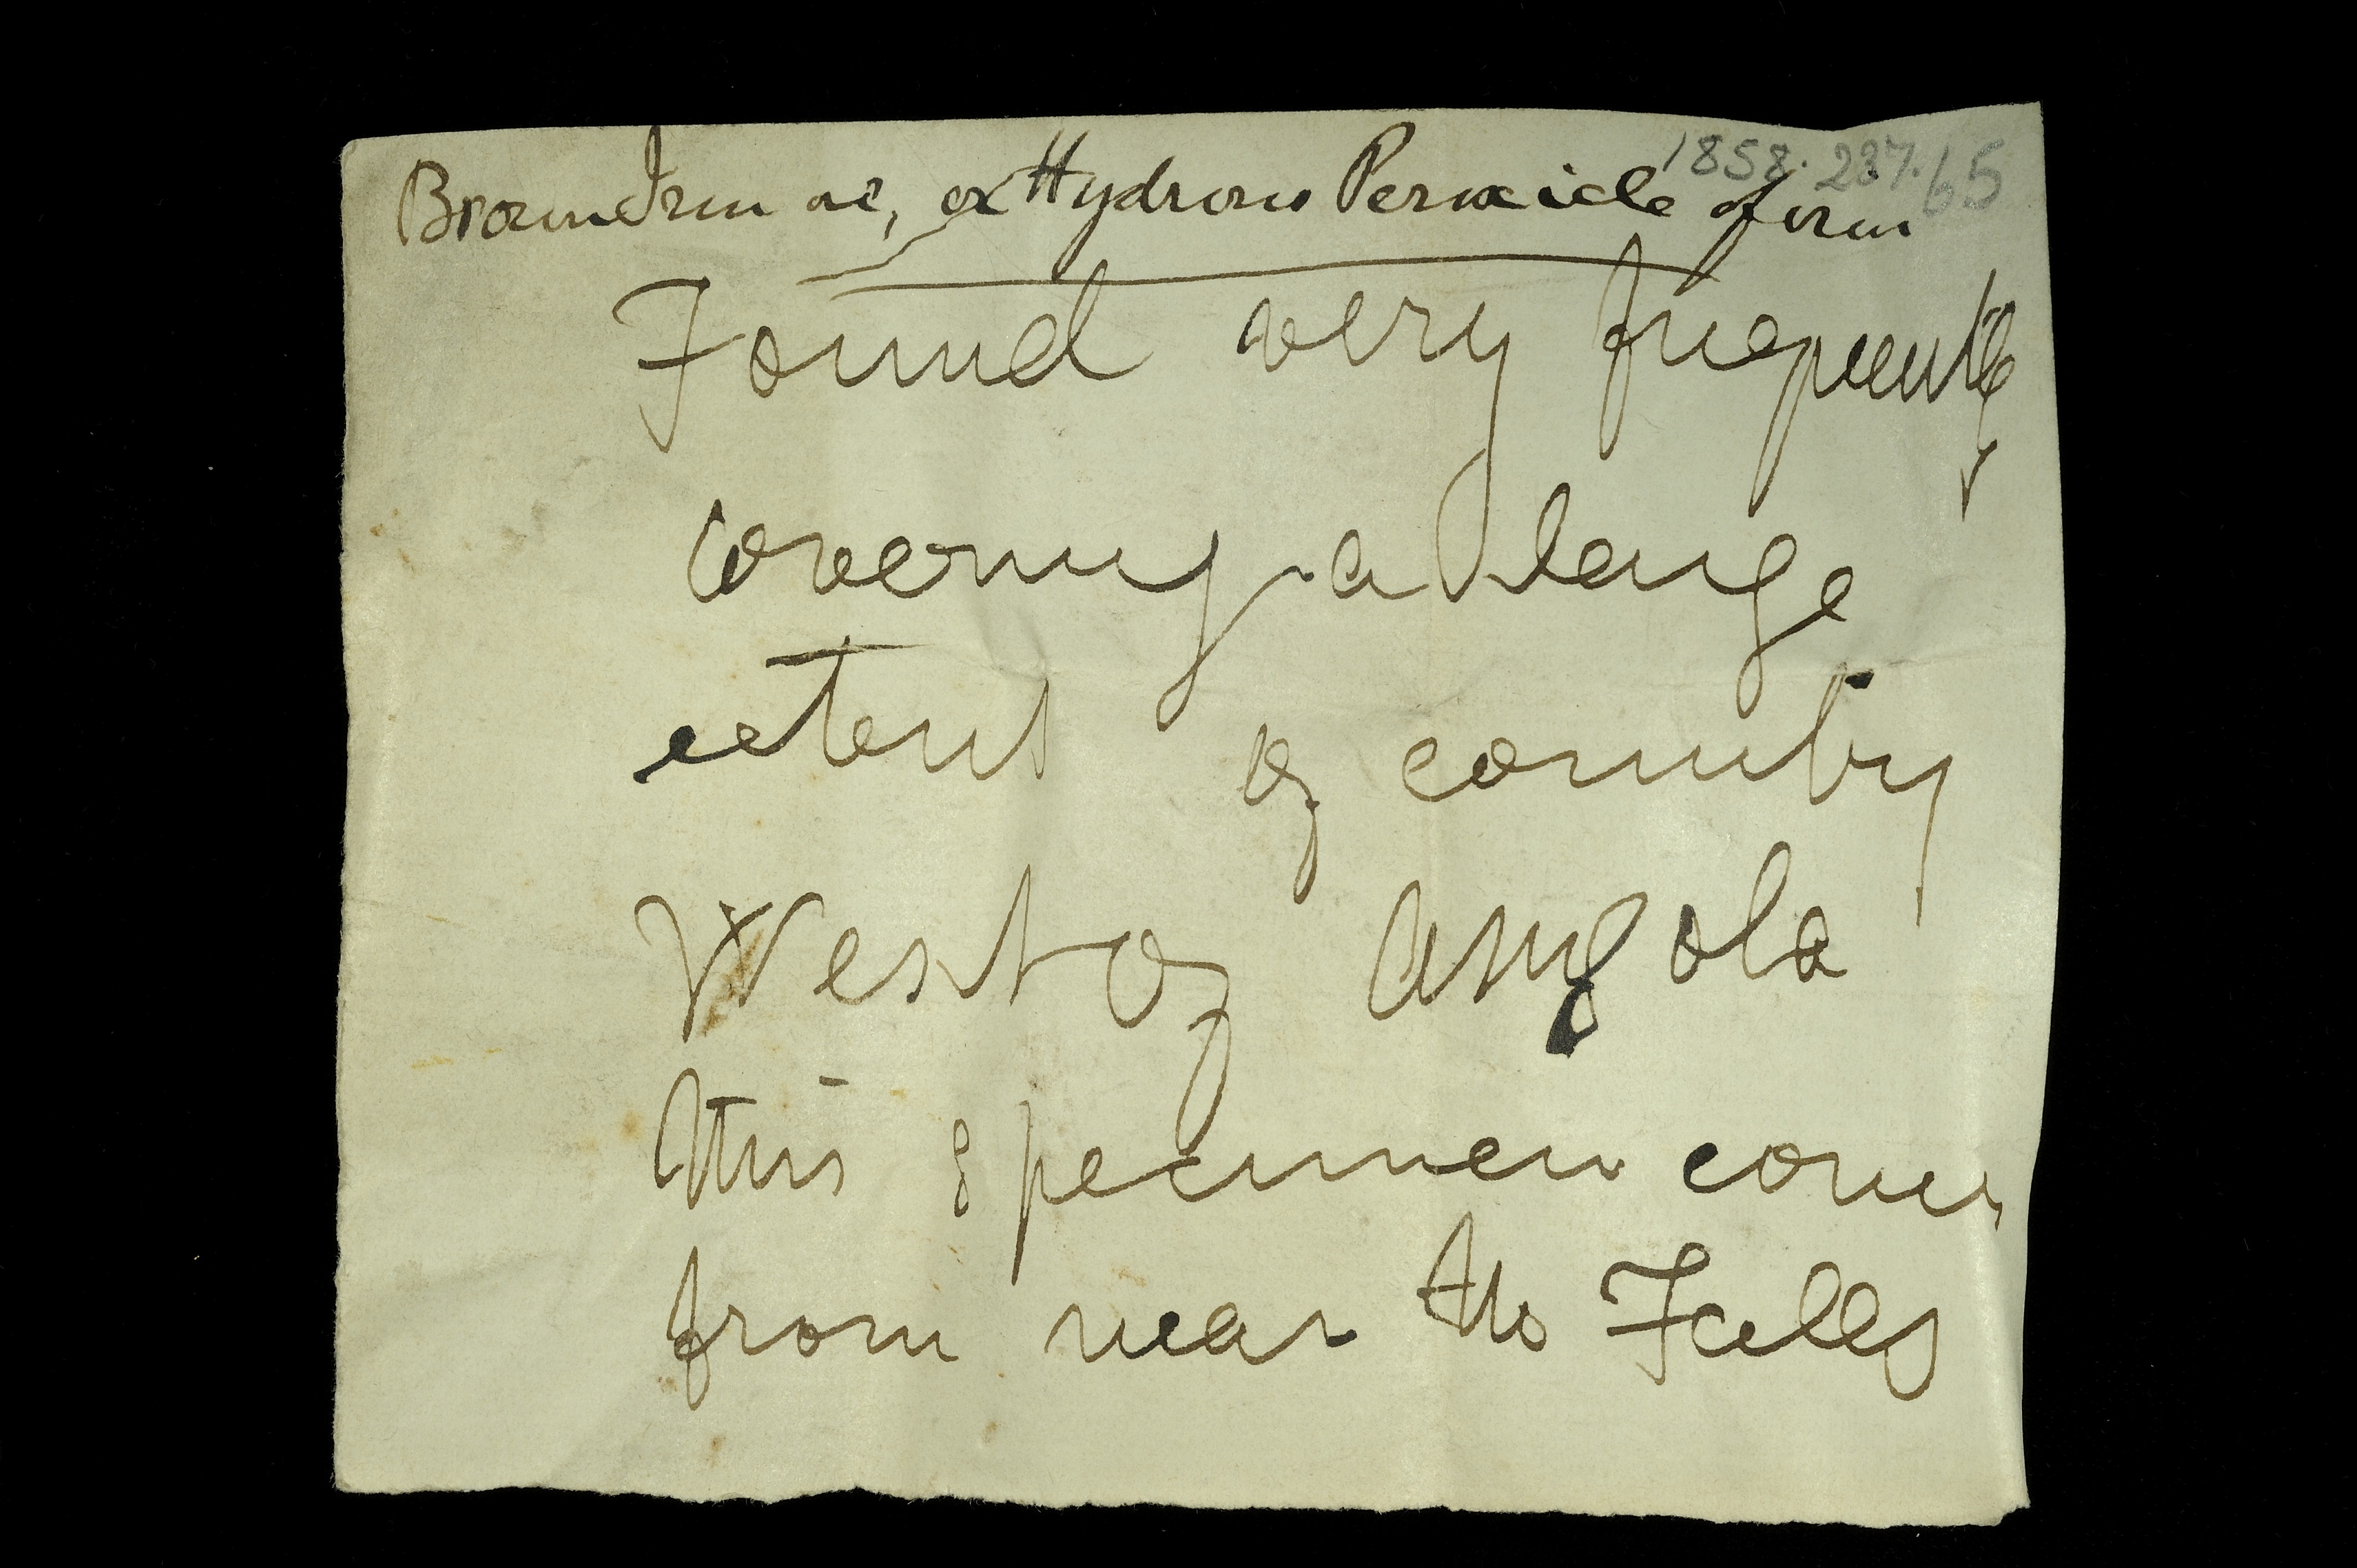 Livingstone’s note written in the field for the iron ore: ‘Found very frequently covering a large extent of country west of Angola. This specimen comes from near the falls.’